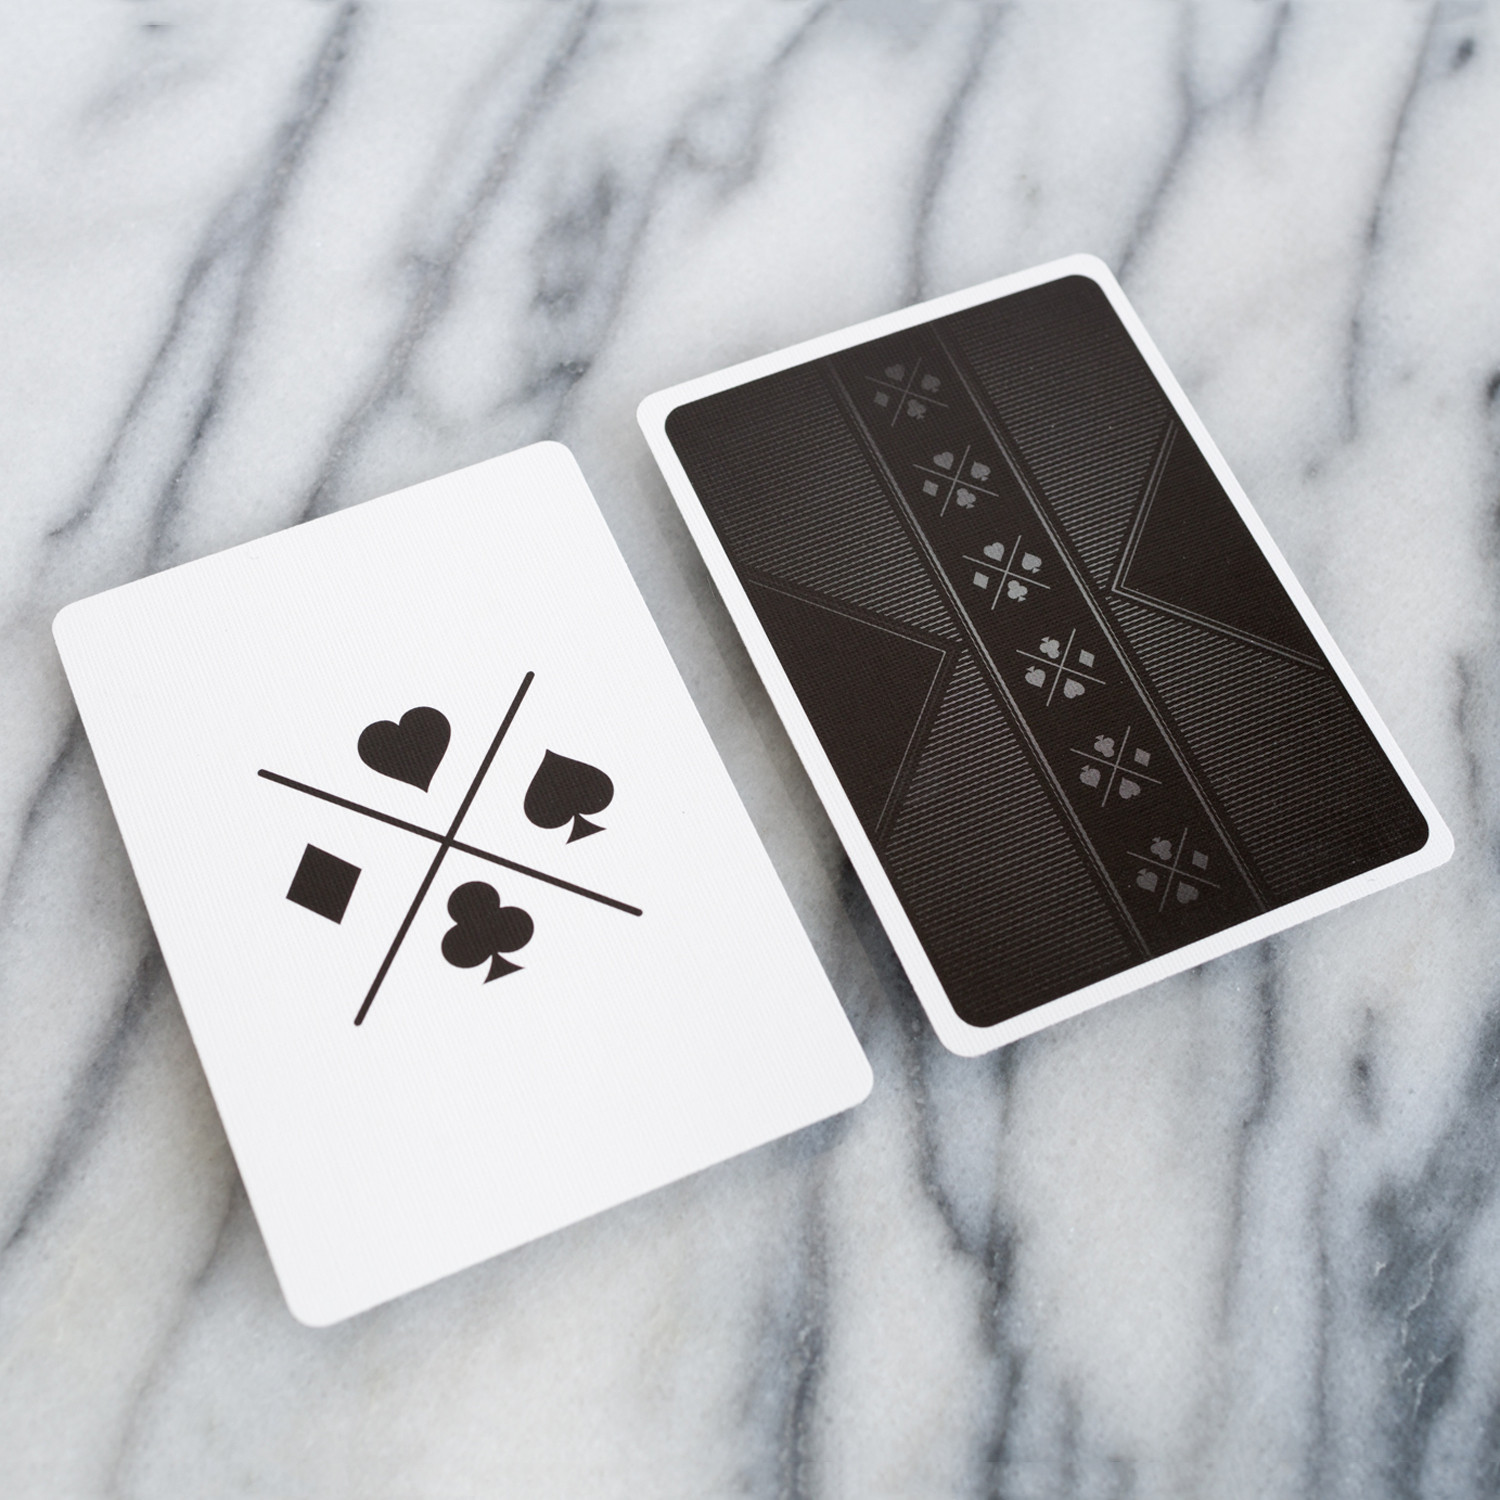 ace-of-diamonds-print-playing-cards-connie-lim-touch-of-modern